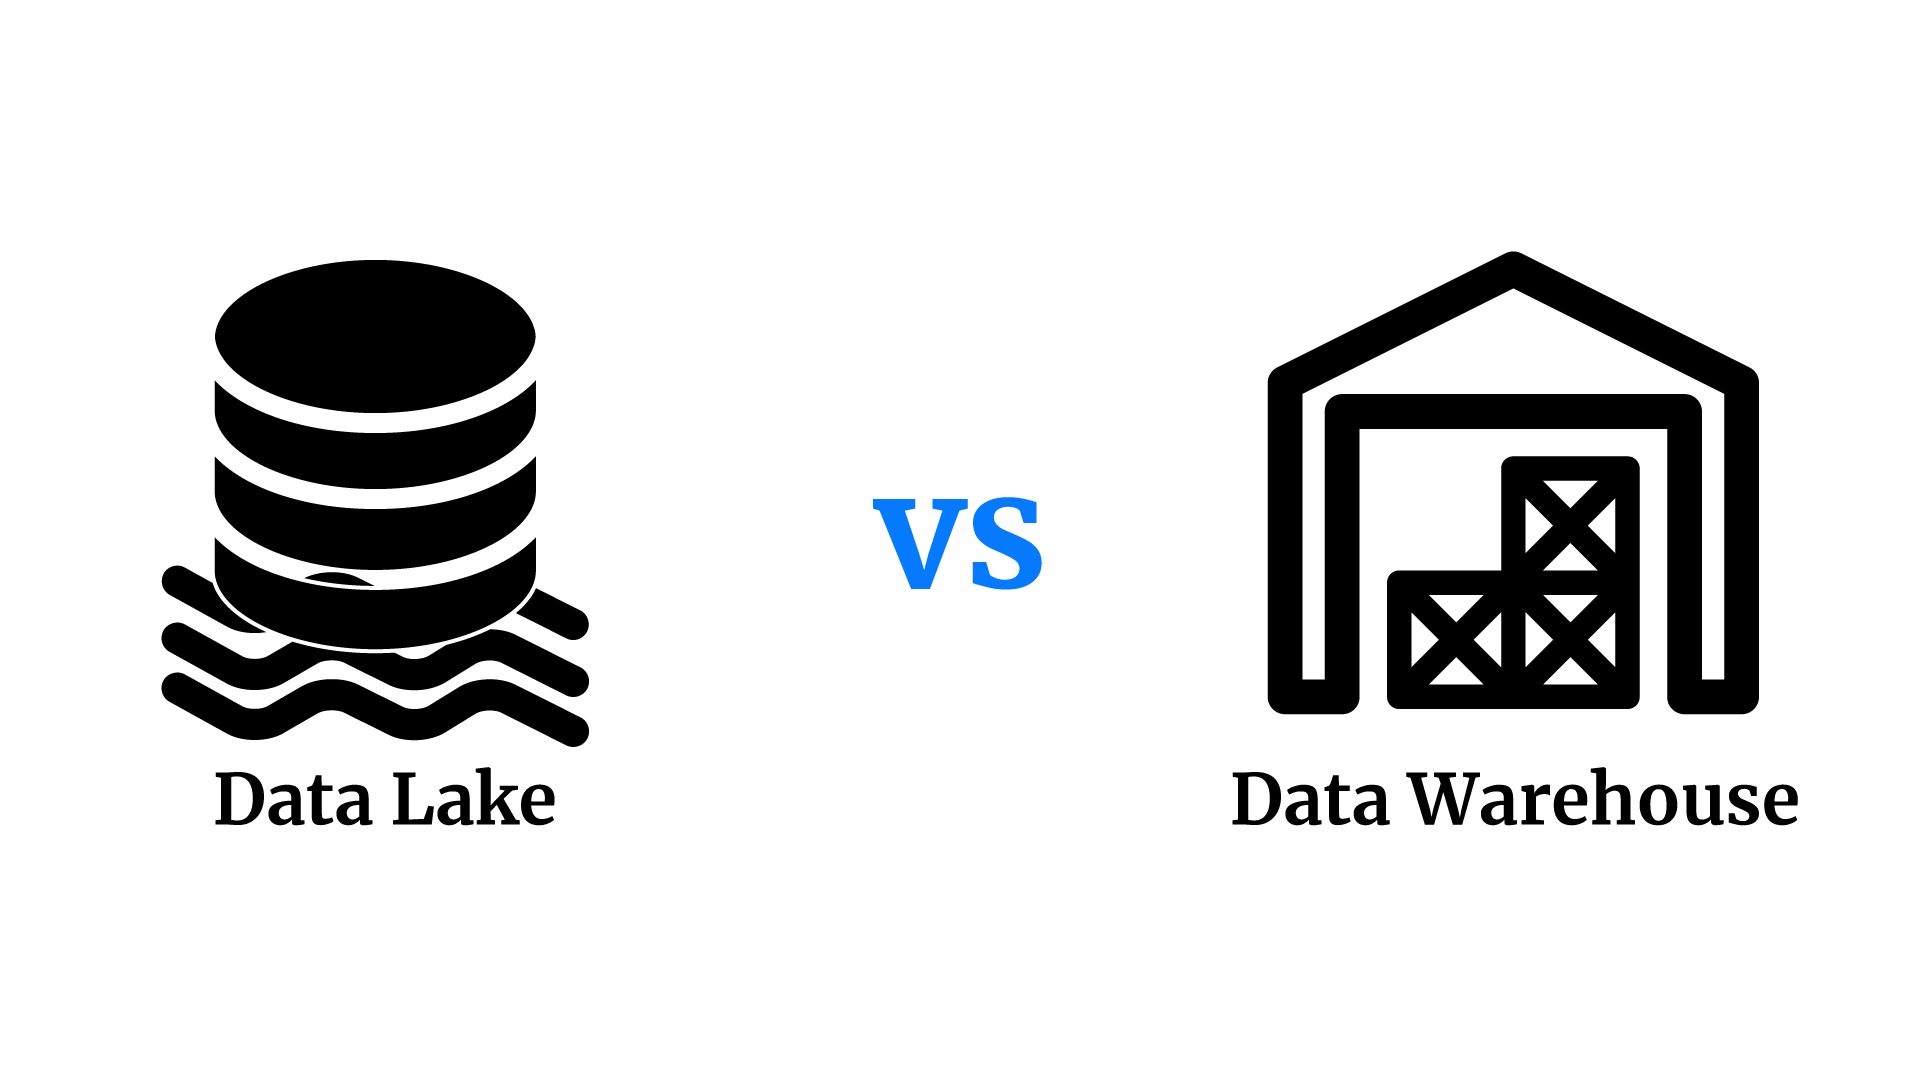 Data Lake vs. Data Warehouse: What are the differences?